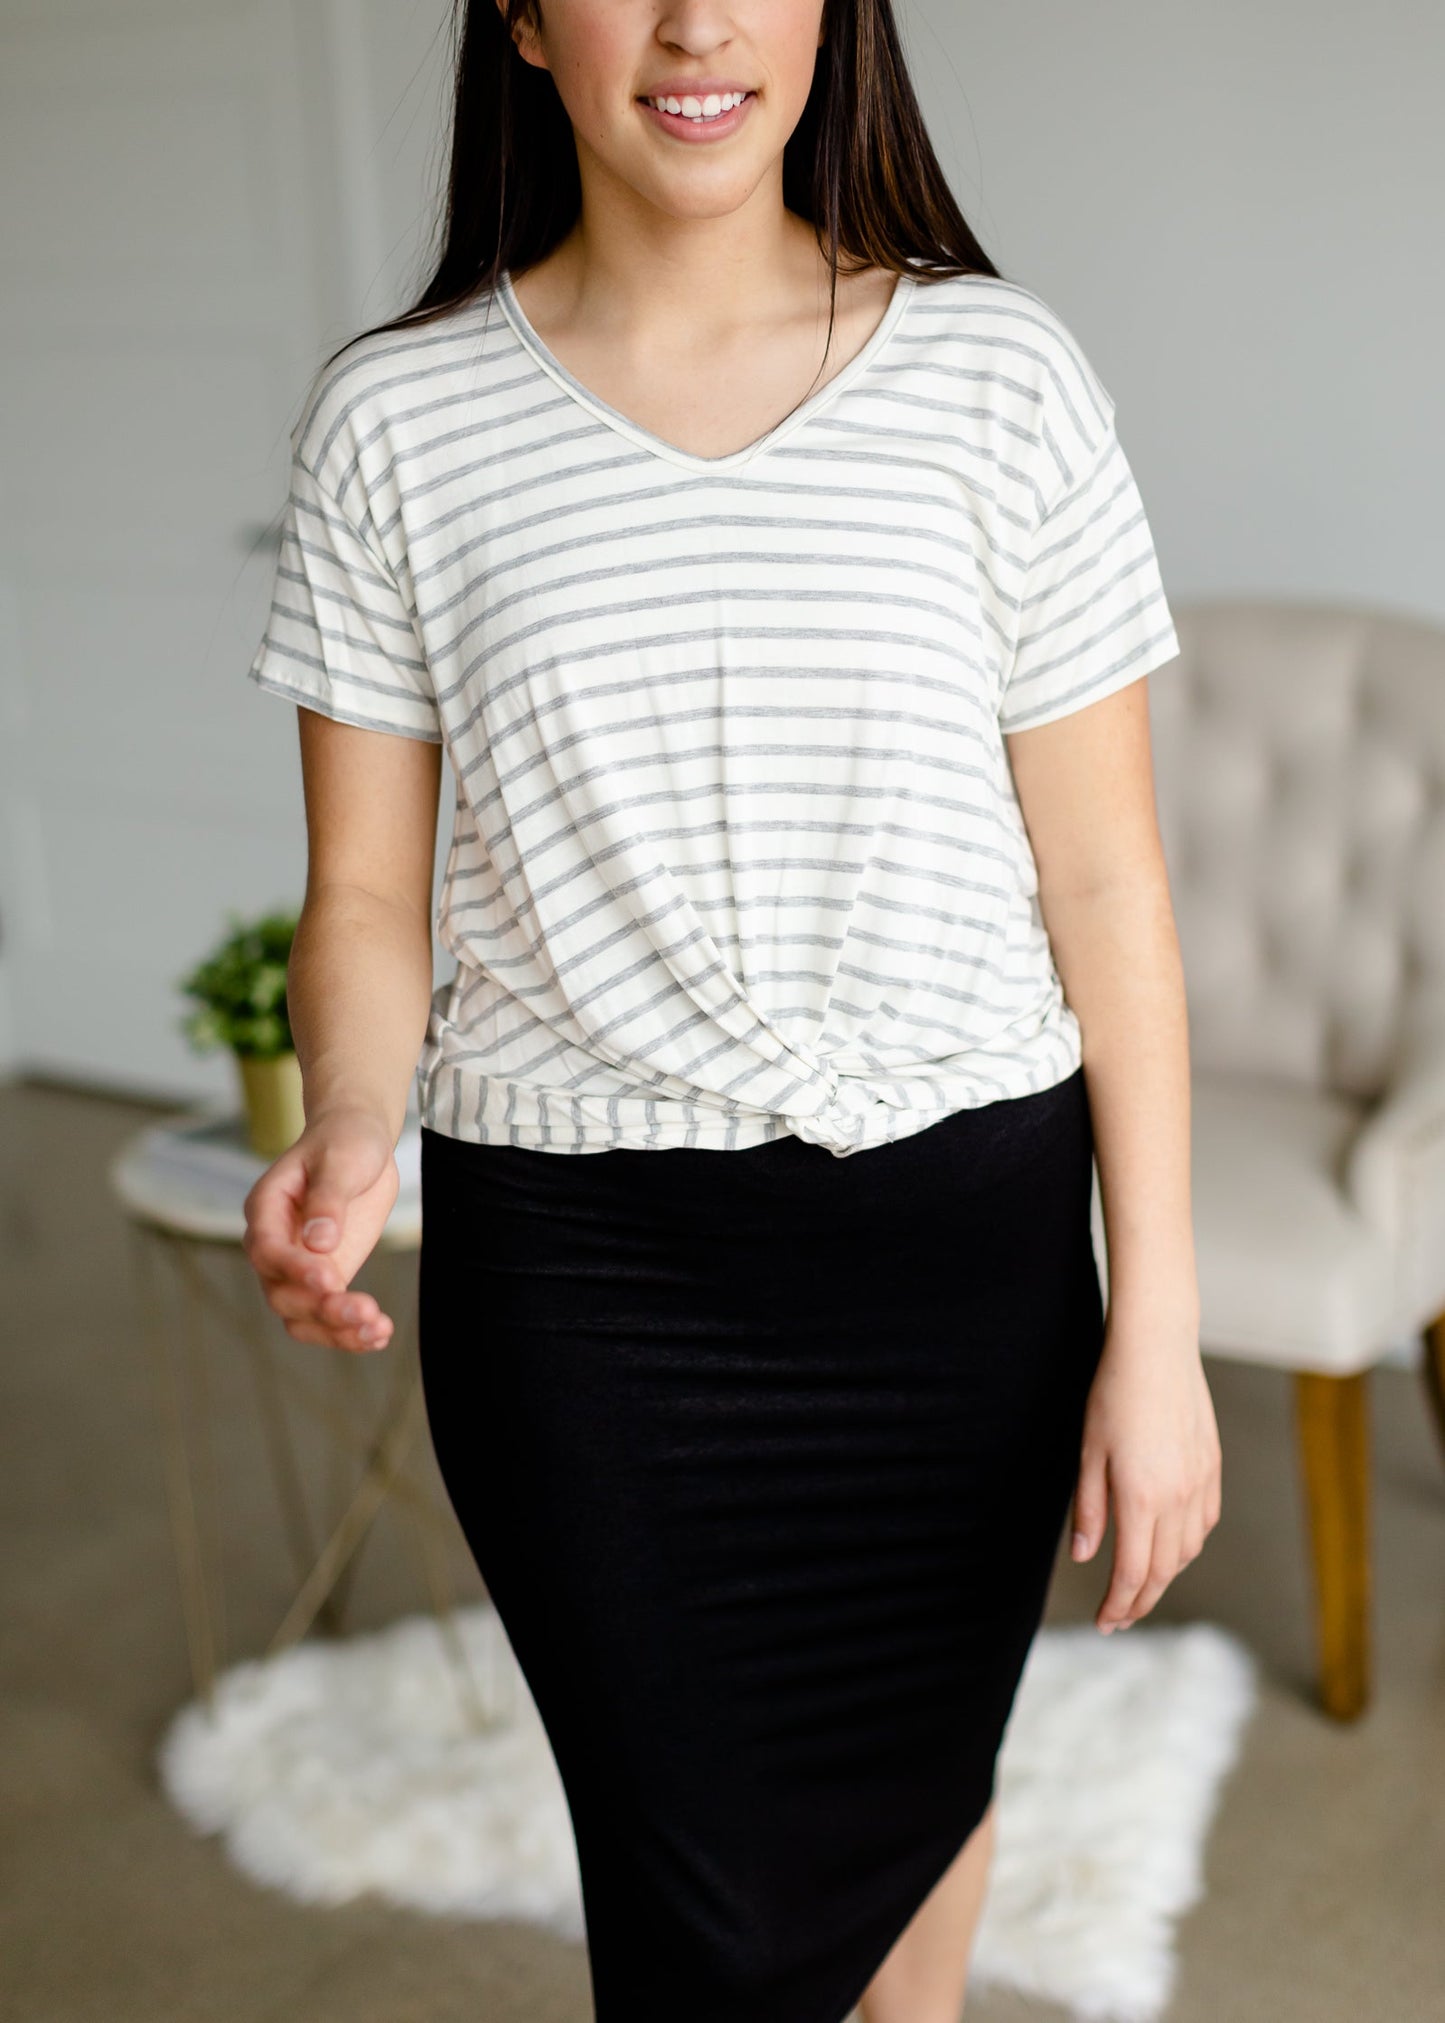 Heather Gray Striped Knot Top - FINAL SALE Tops